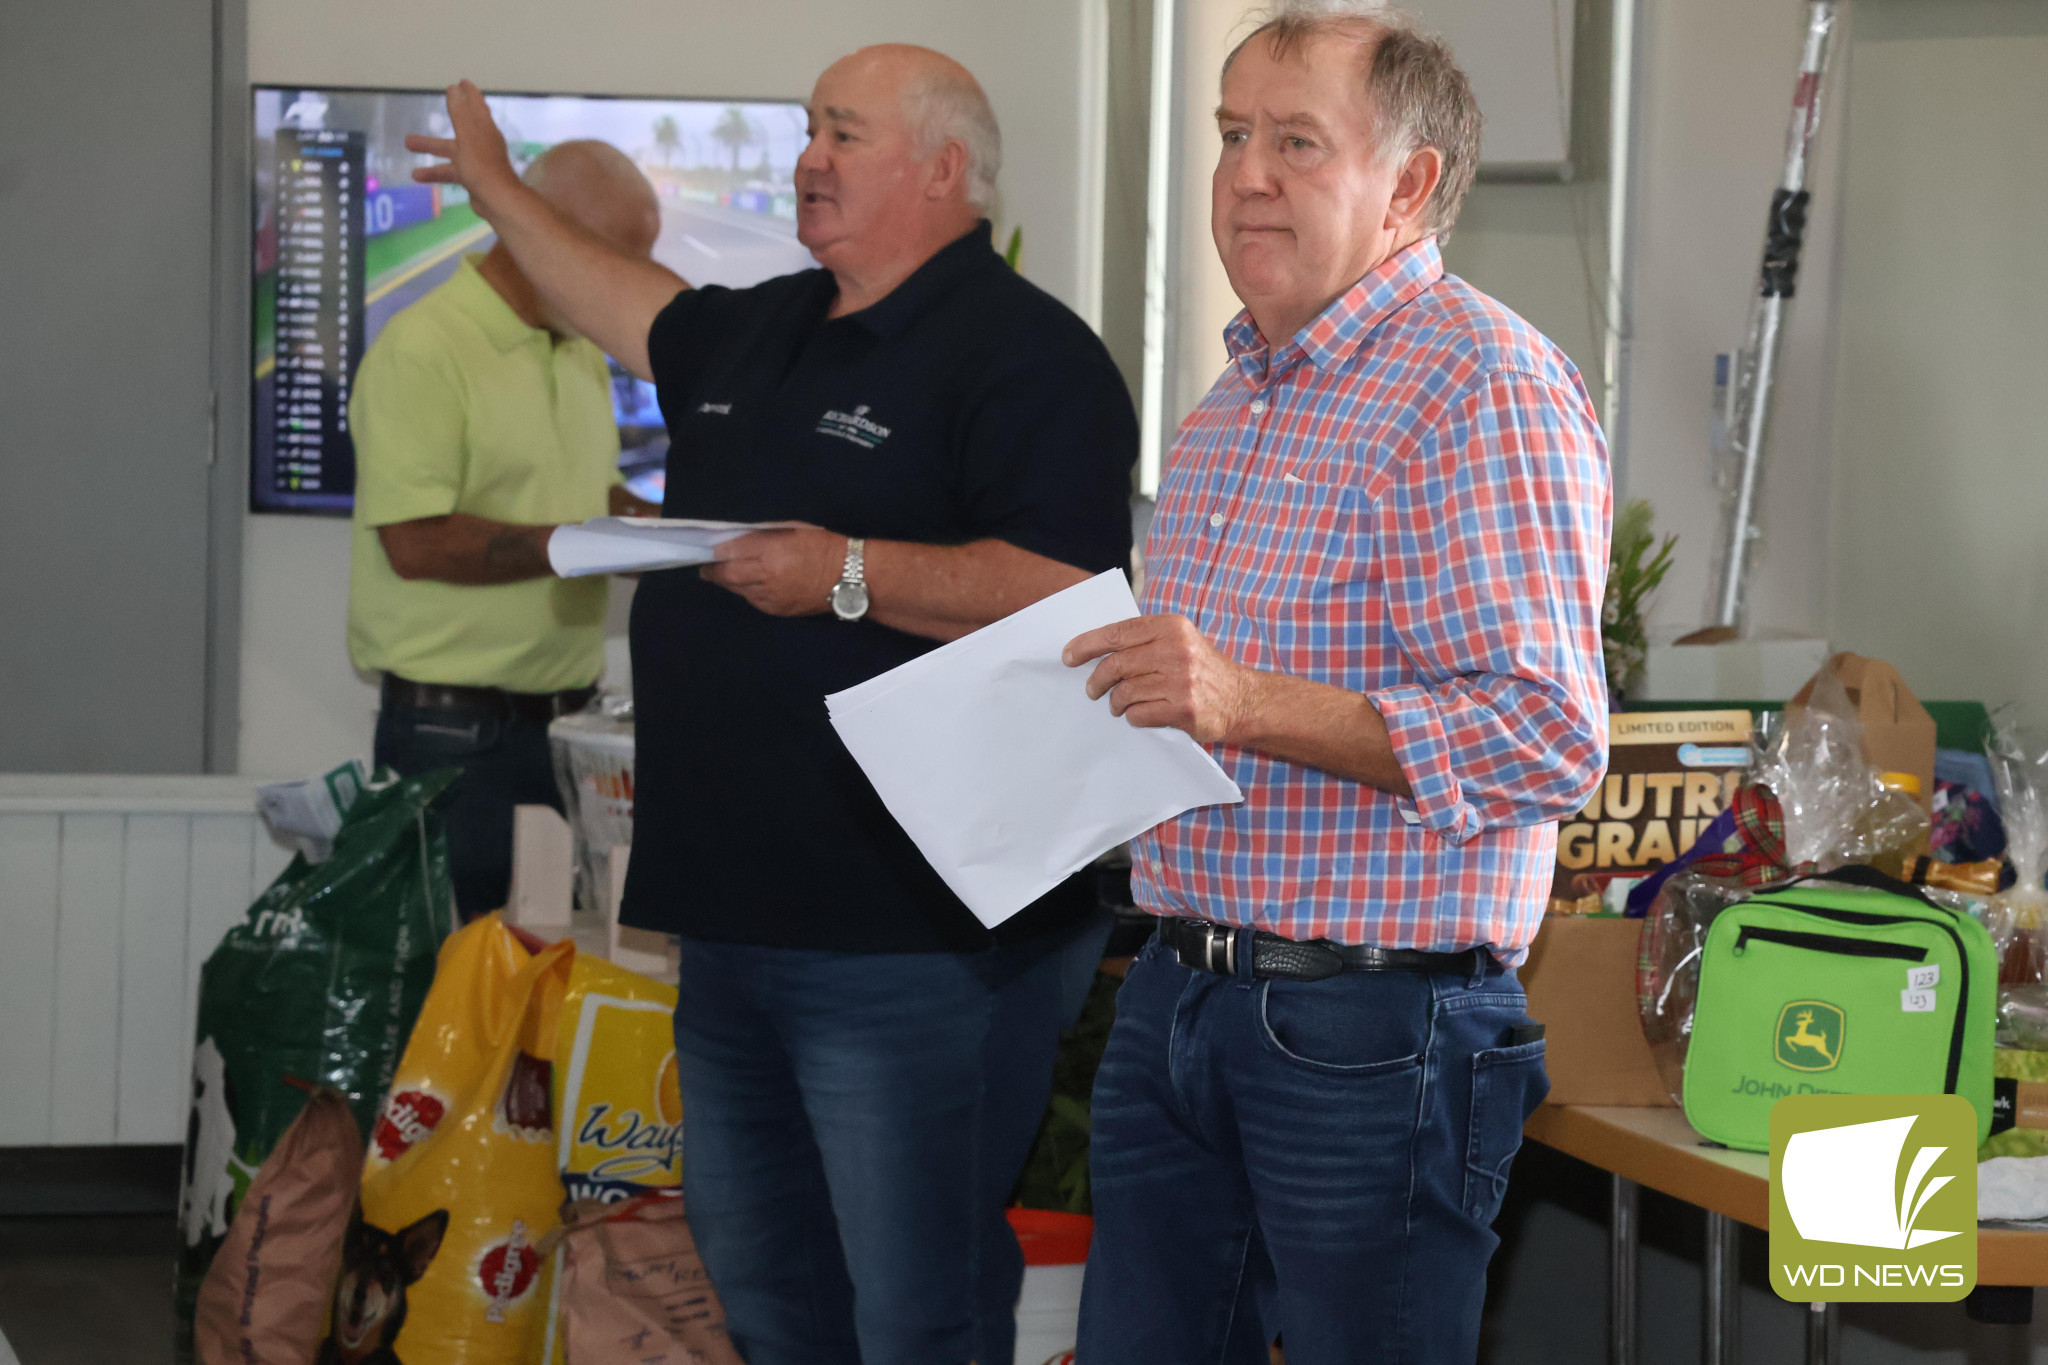 Funds raised: The community dug deep this year as part of the Good Friday Appeal, including Garvoc smashing its own fundraising record by more than $9000. Pictured is Jack Kelly and Tim Healy taking bids at the Garvoc goods and services auction.